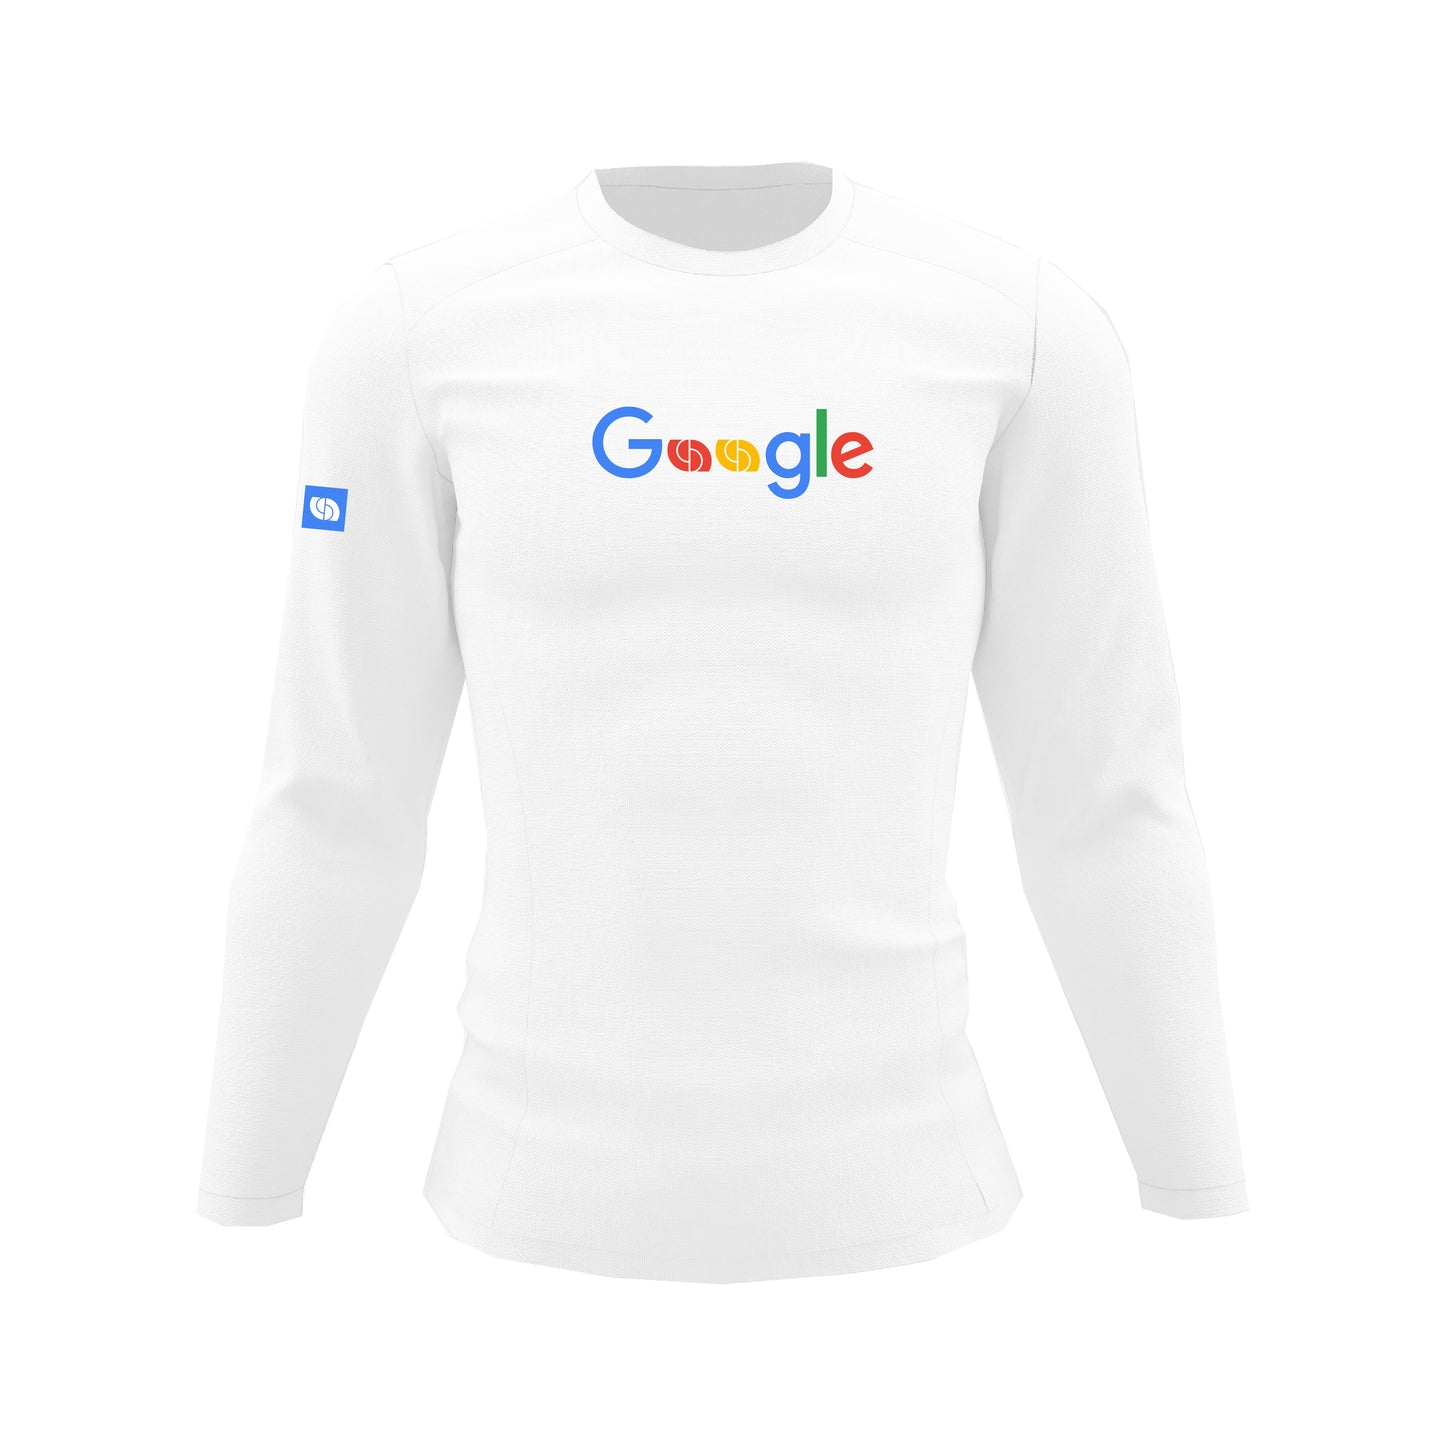 Google - Mind Force ® Sweatshirt by Athletic Forces -  Model 3